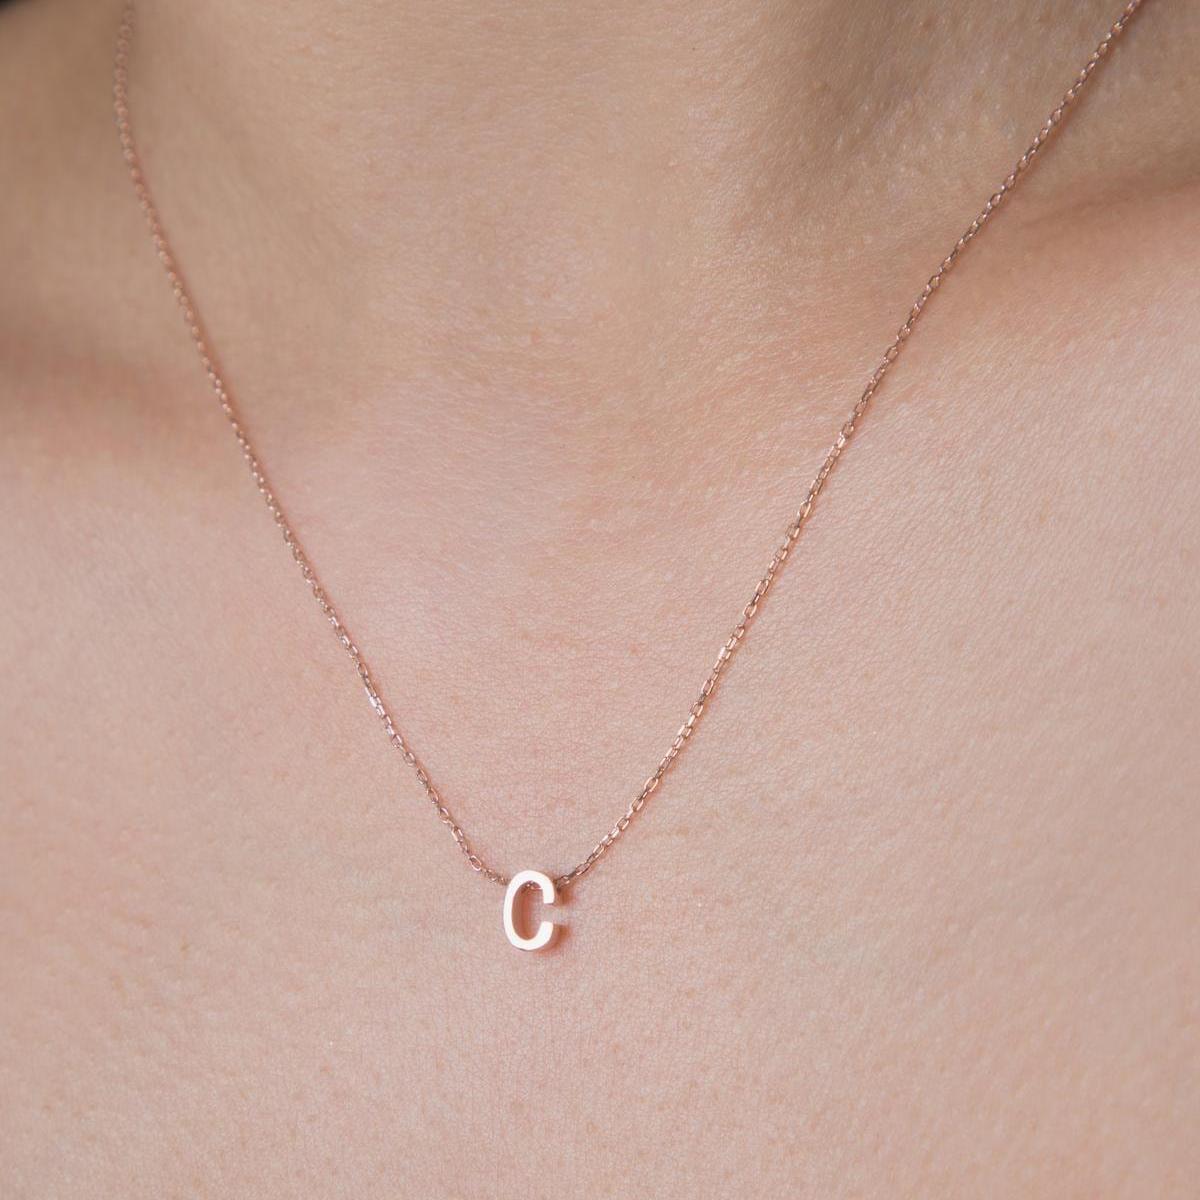 C Initial Necklace Rose • Rose Gold Initial Necklace • Gift For Her - Trending Silver Gifts